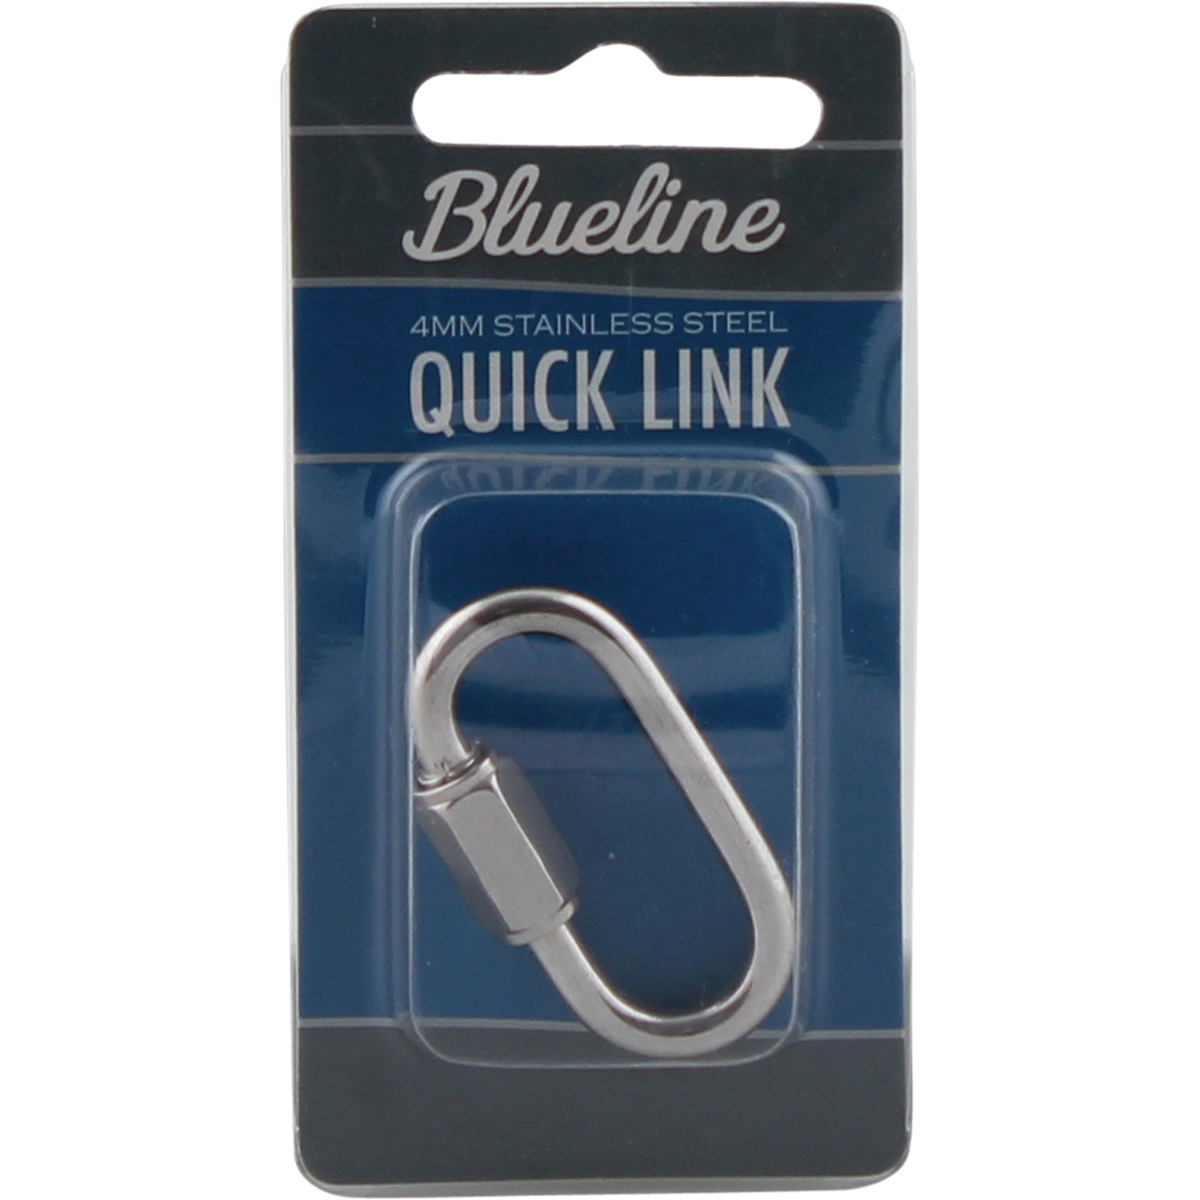 Blueline Stainless Steel Quick Link 4mm